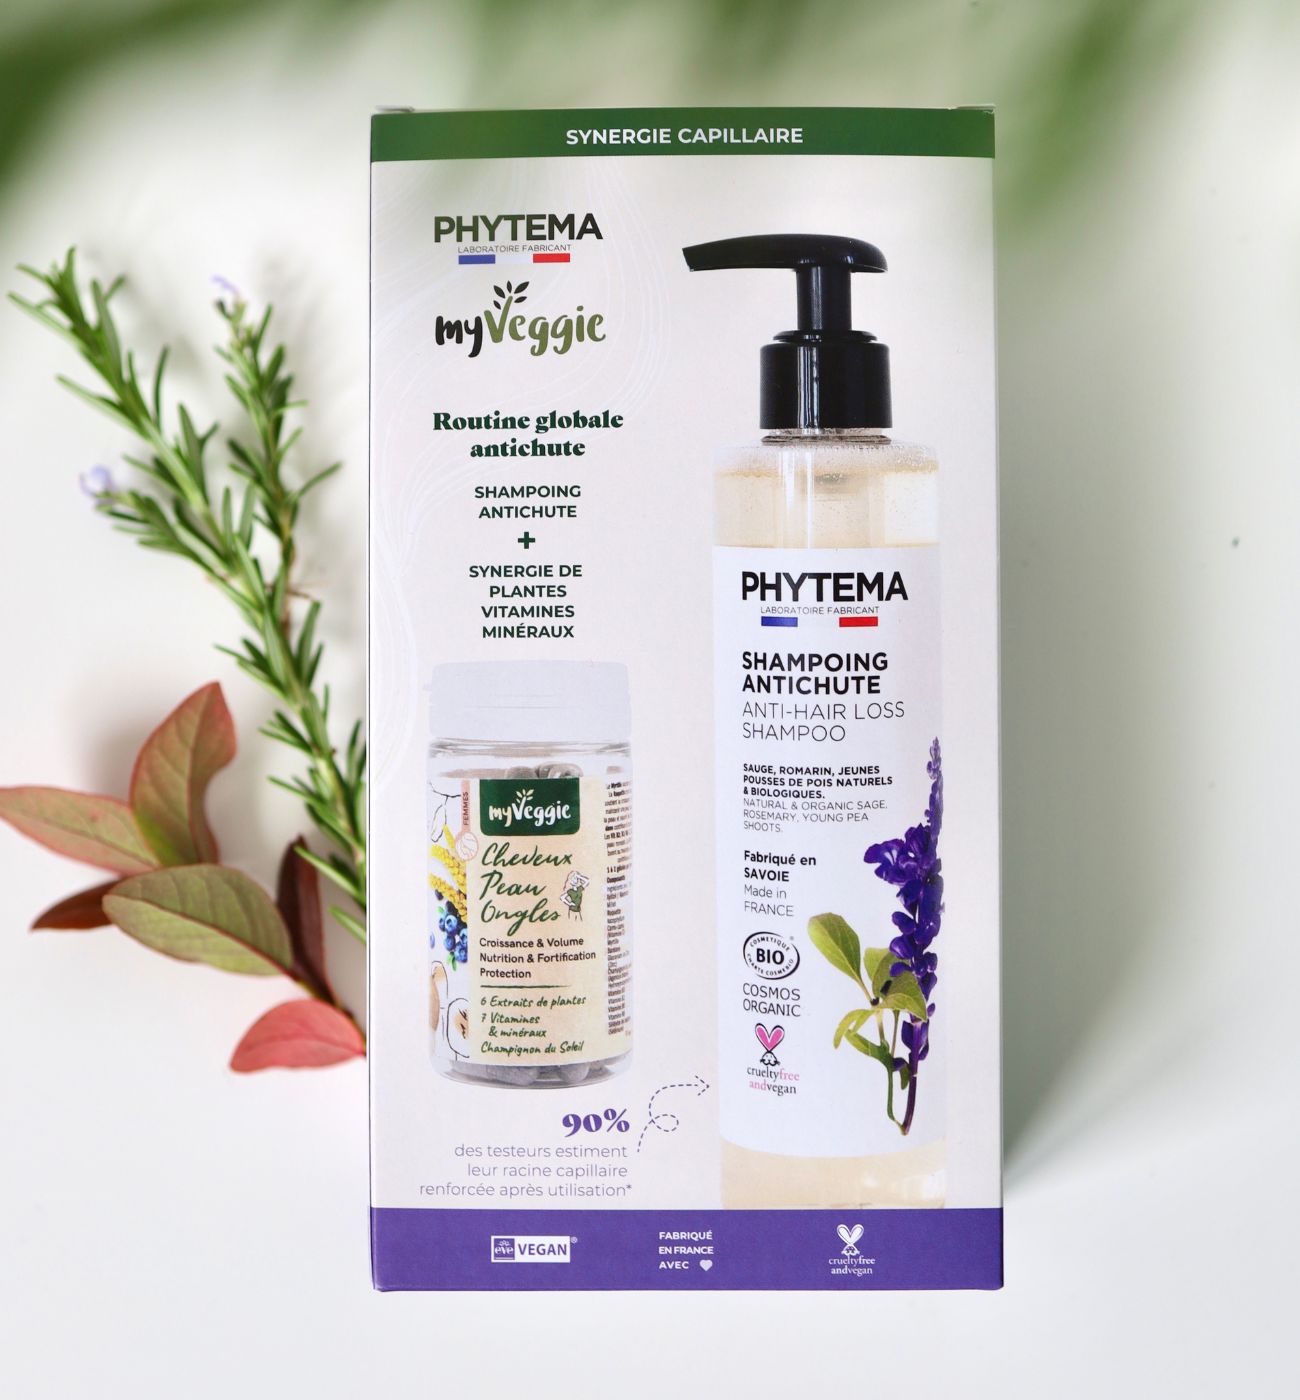 chute-cheveux-shampoing-complements-alimentaires-myveggie-phytema